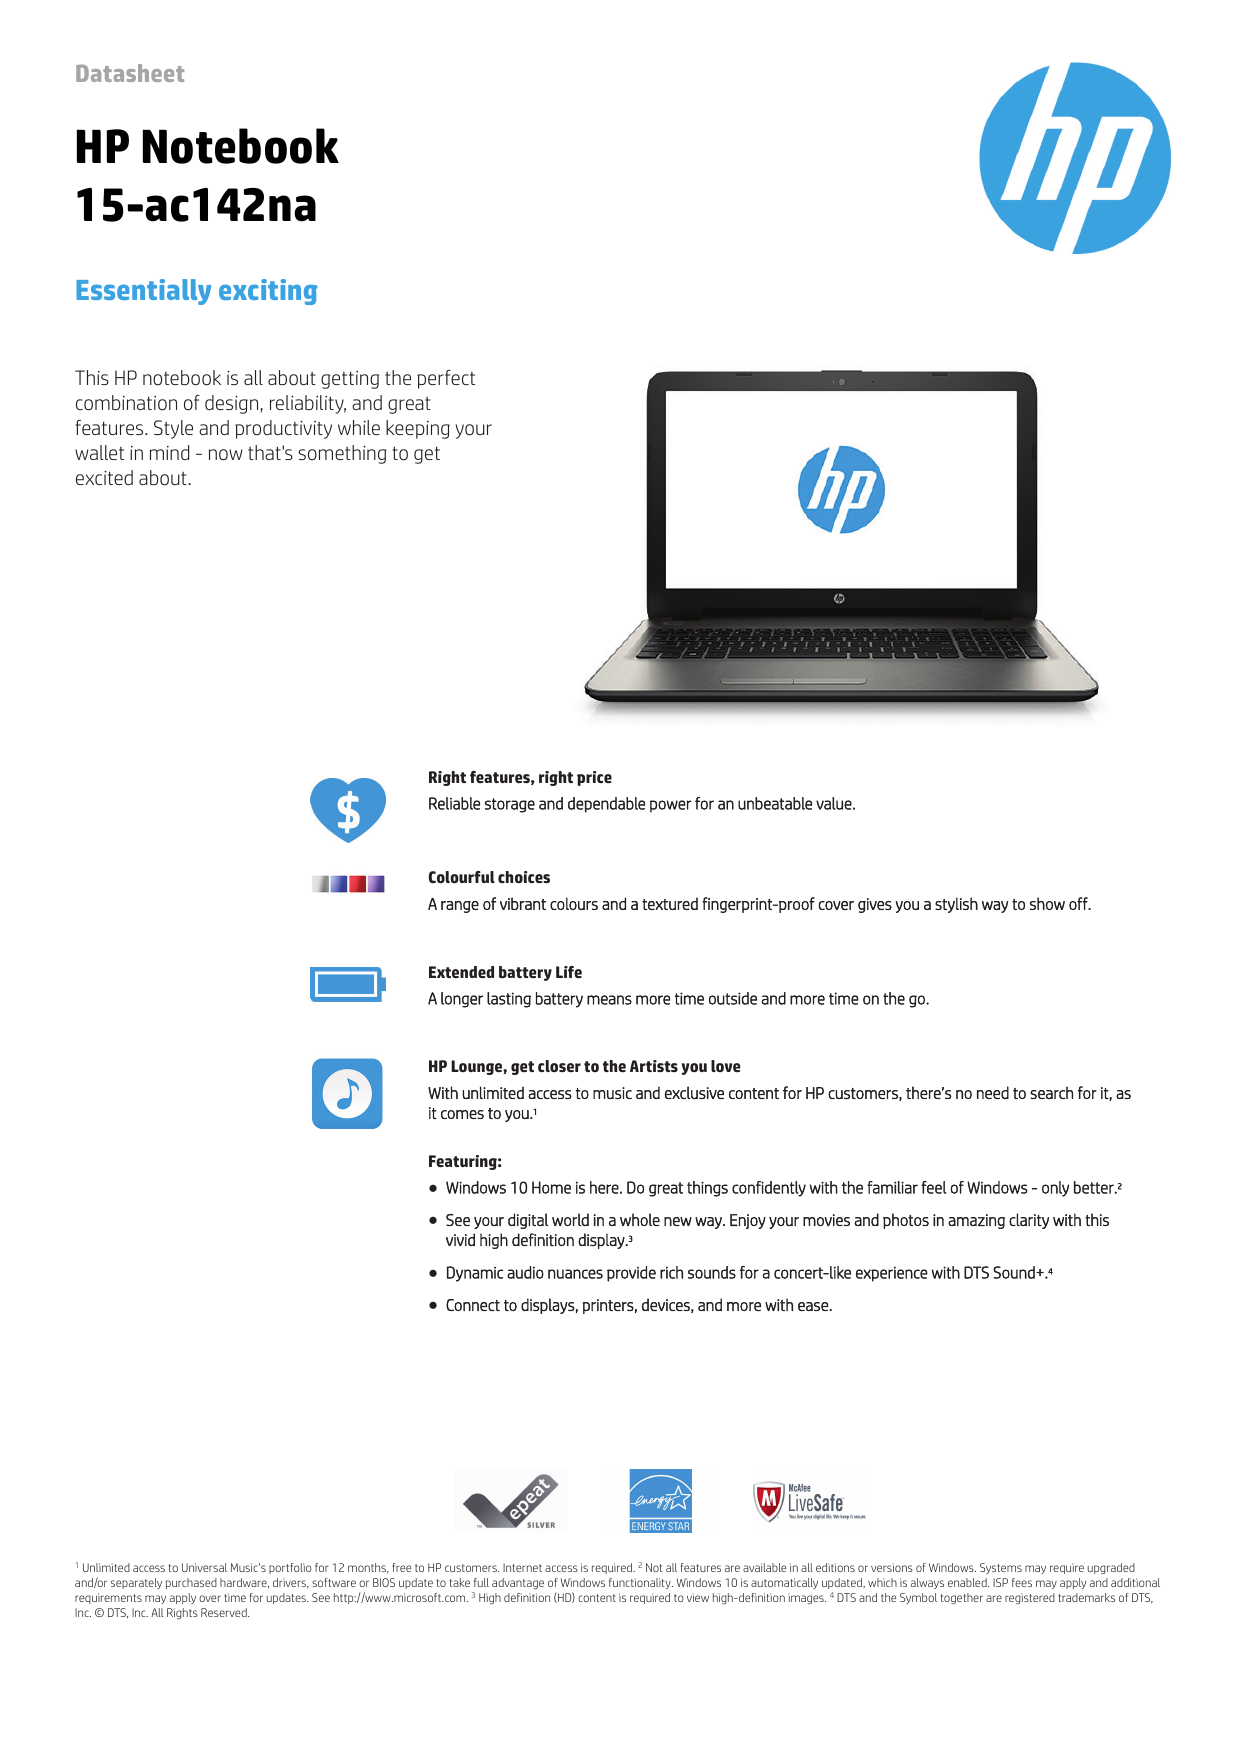 hp truevision hd compatible with skype on windows 10